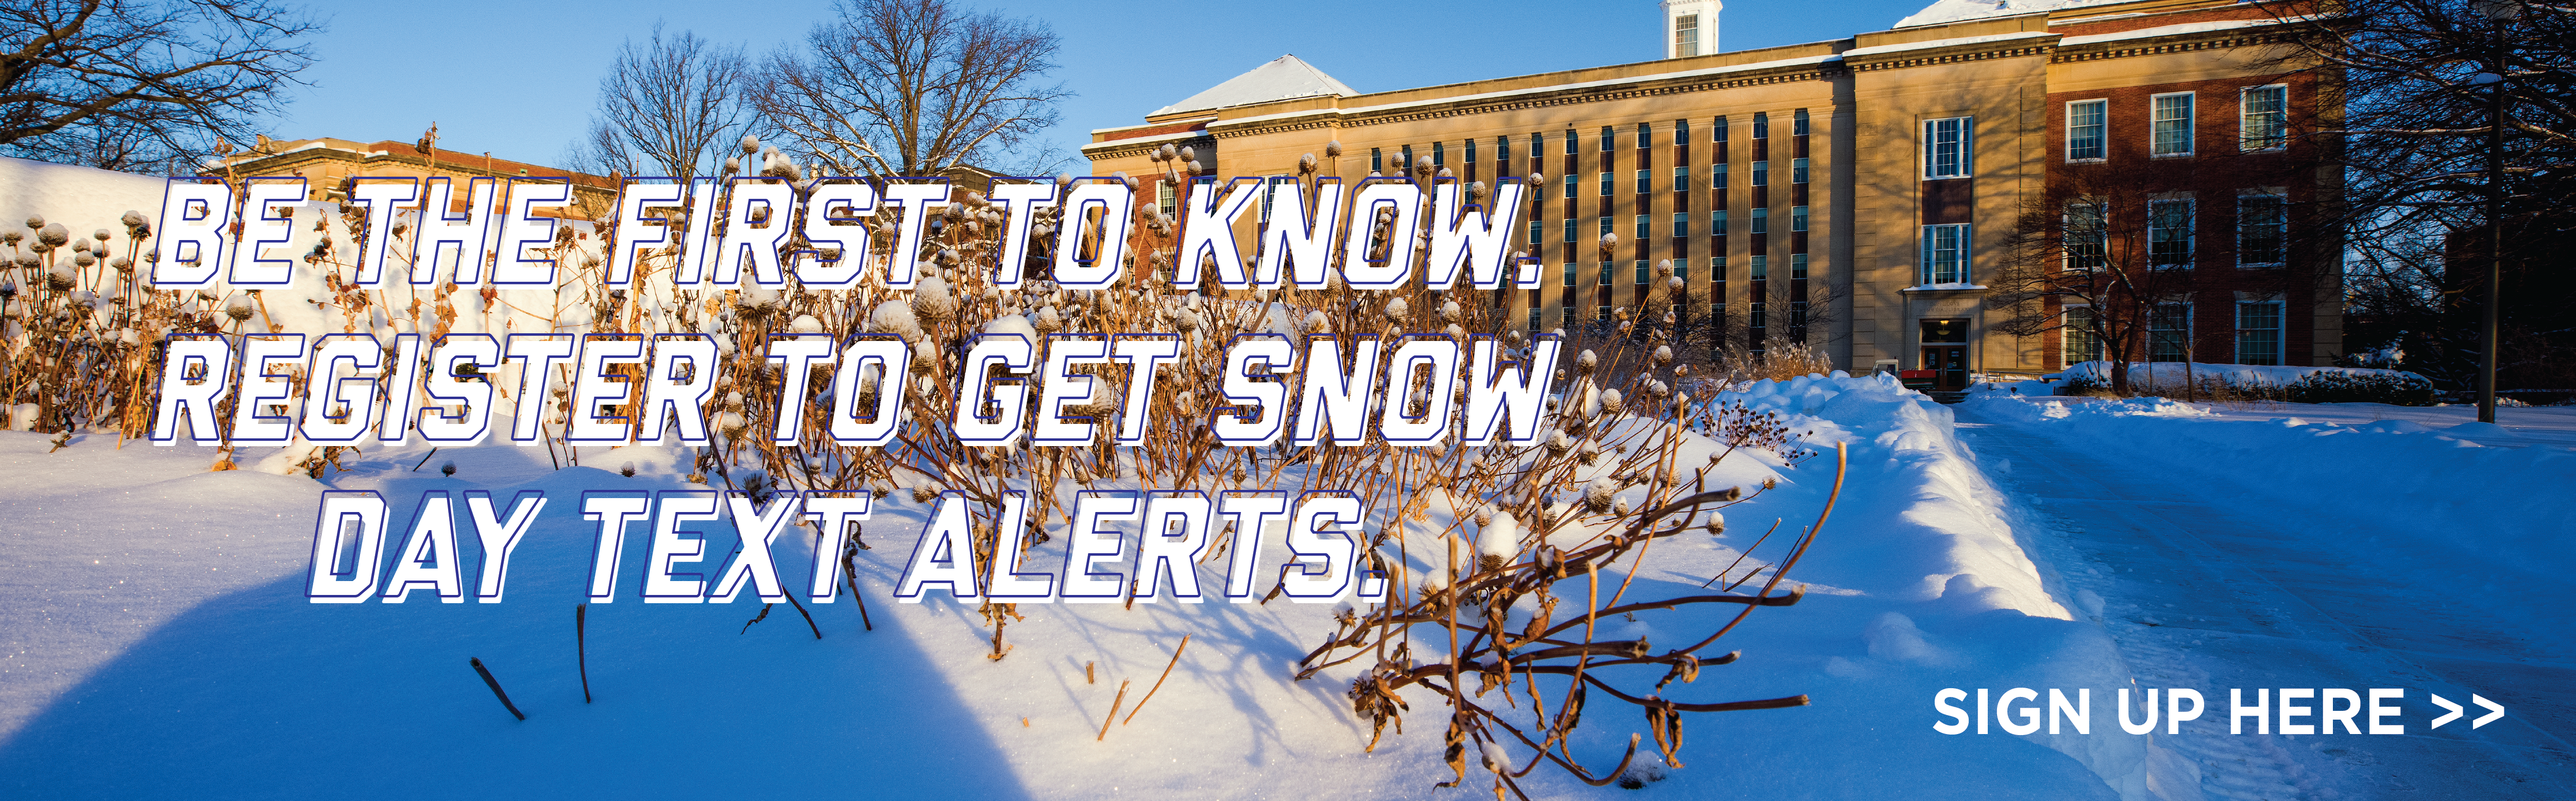 Be the first to know. Sign up to get Snow Day text alerts. https://unlalert.unl.edu